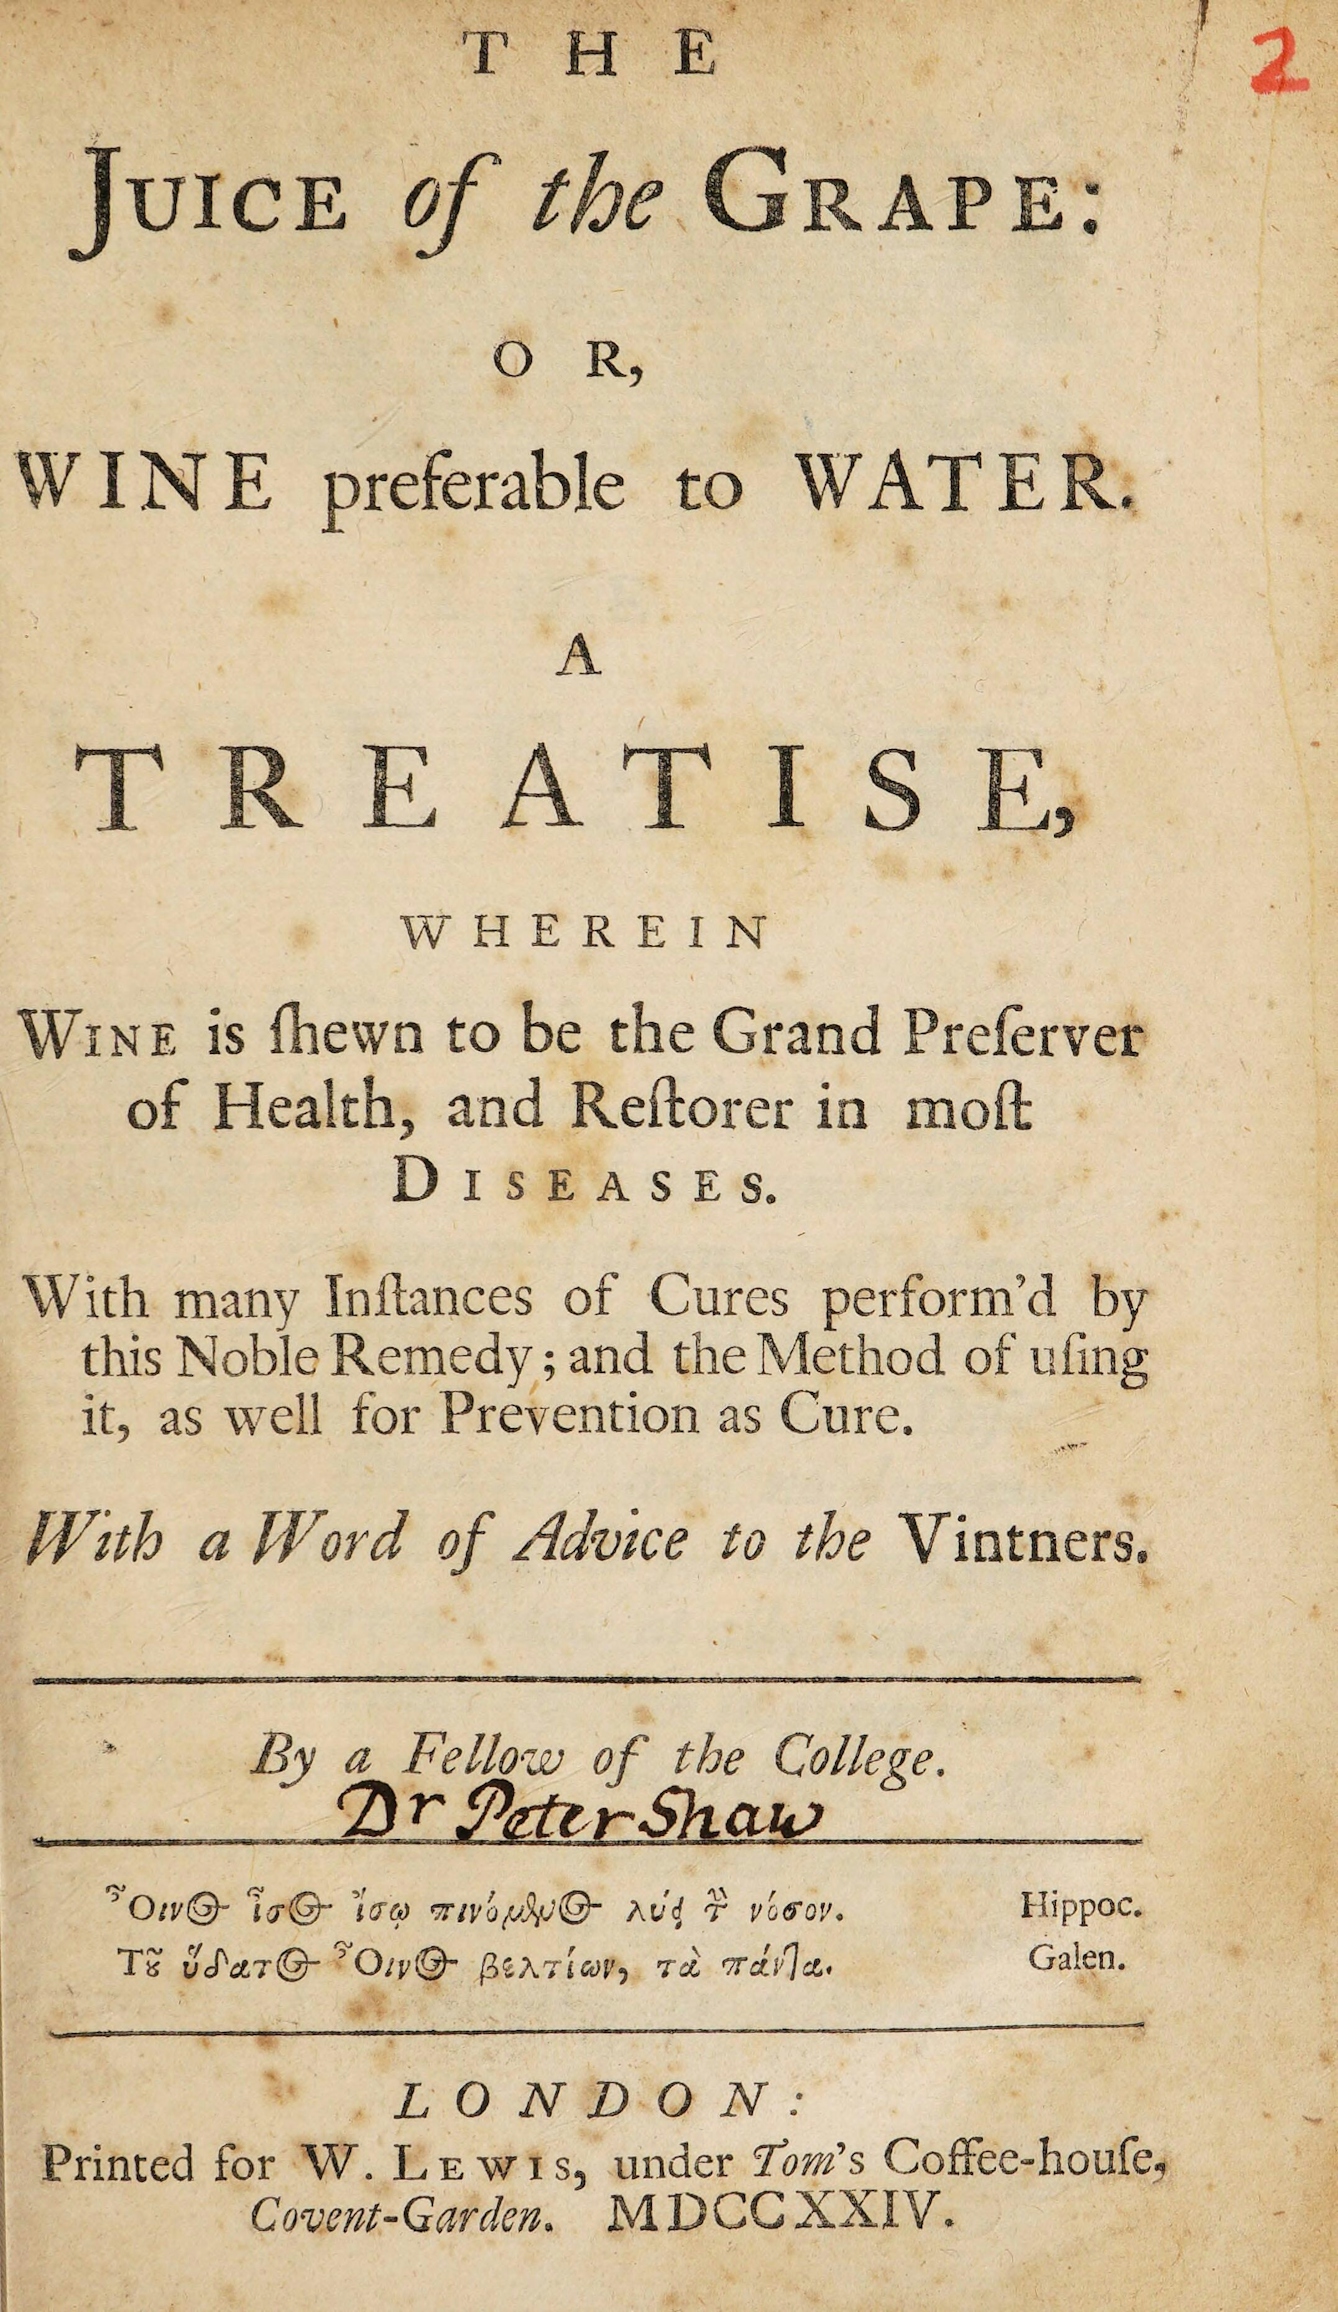 Title page of a book by Peter Shaw entitled 'The Juice of the Grape, or WINE preferable to WATER'.  